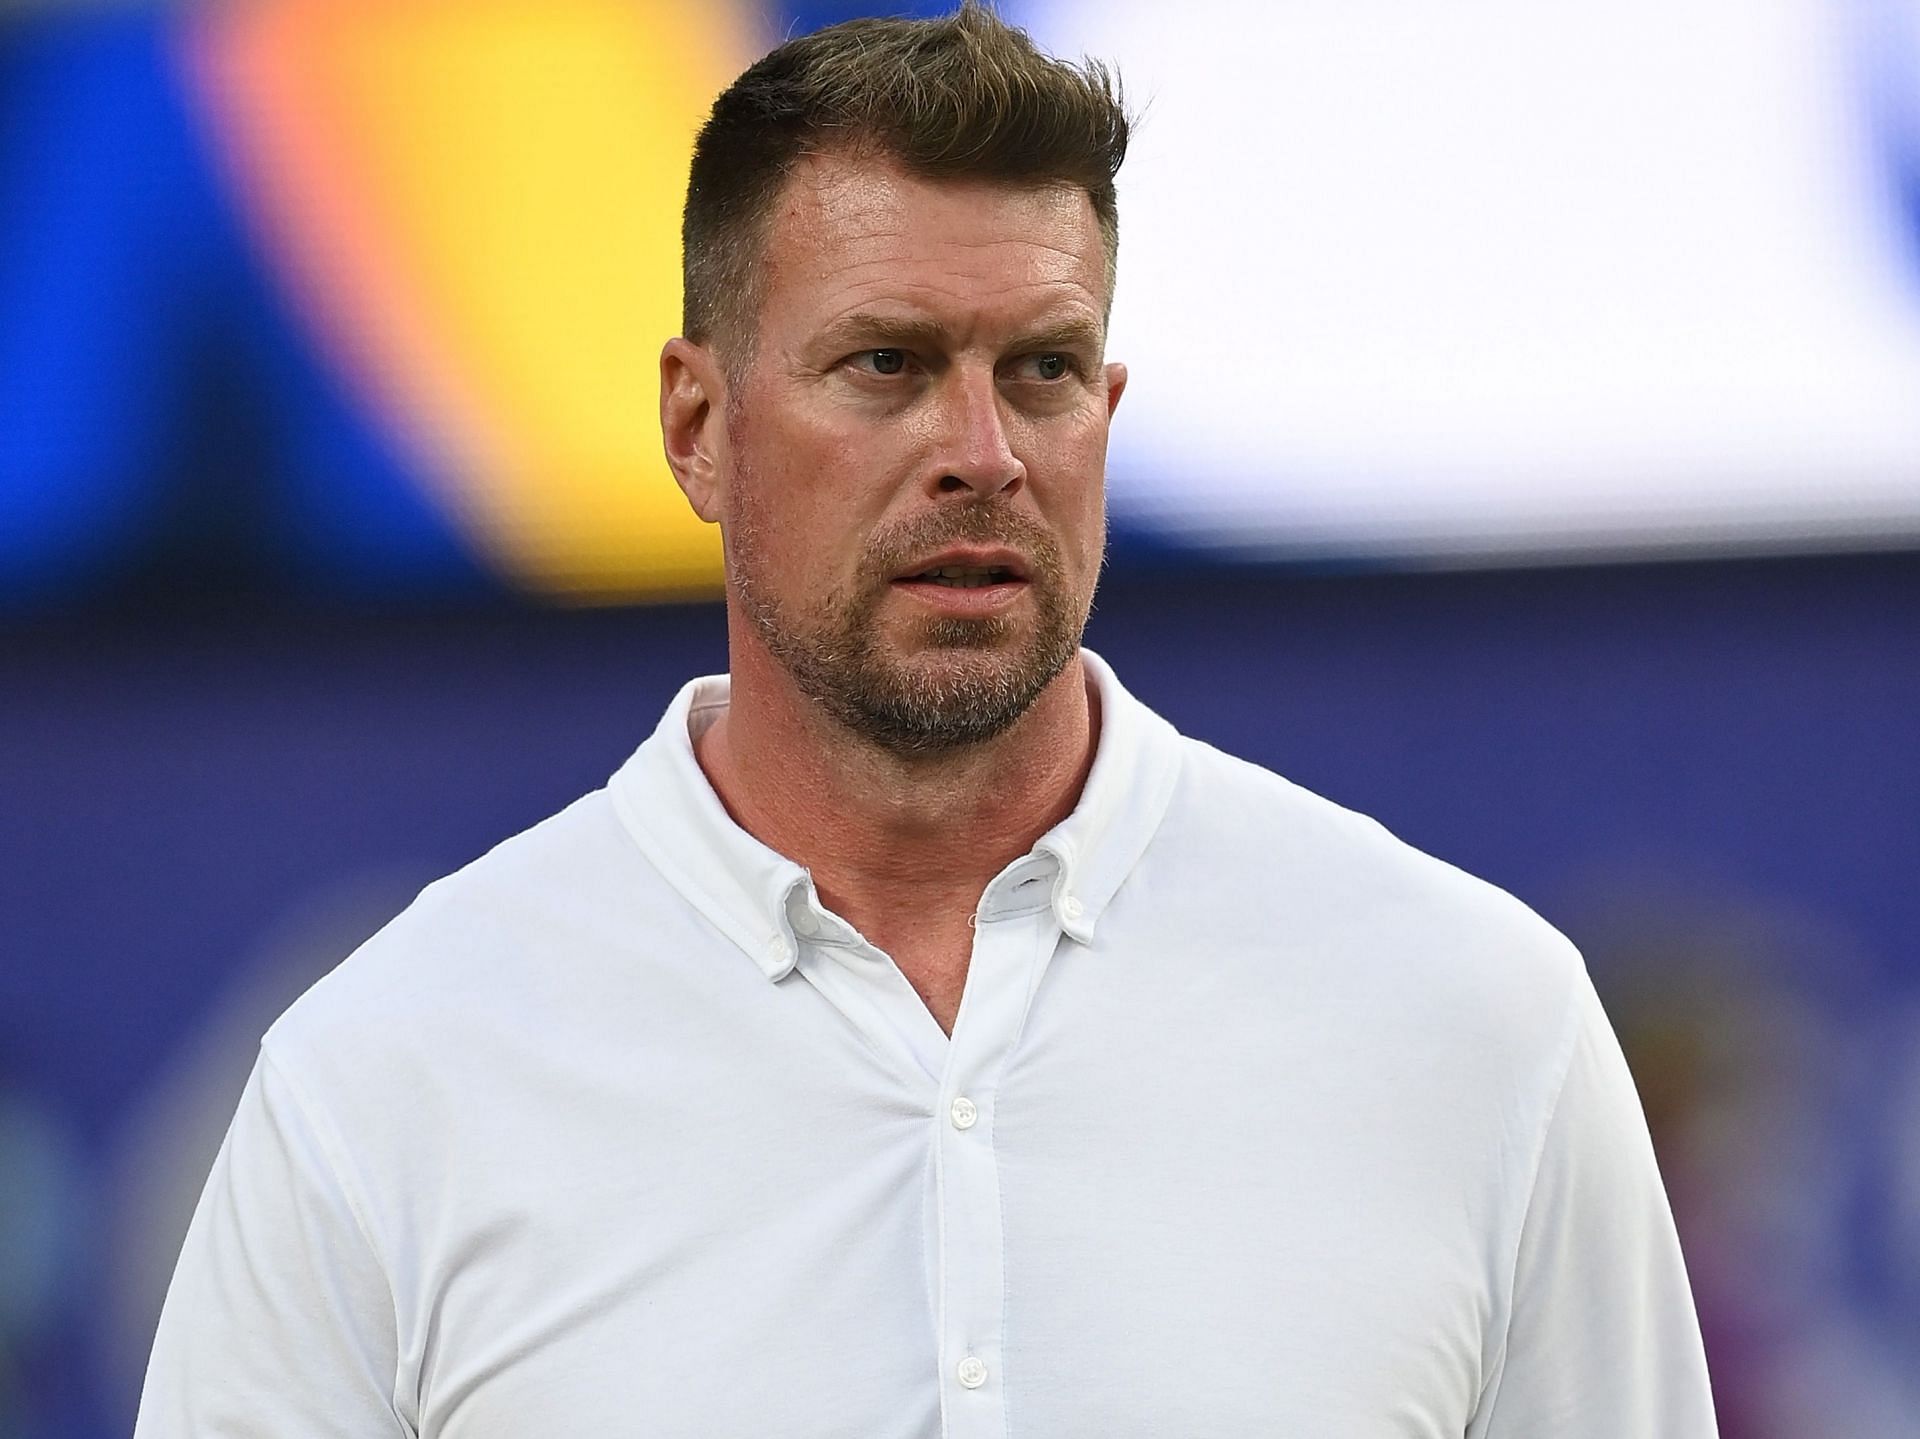 Meet the new Ryan Leaf: After football failure, drug abuse, suicide attempt  and prison, NFL's biggest draft bust now telling his story to help others –  New York Daily News